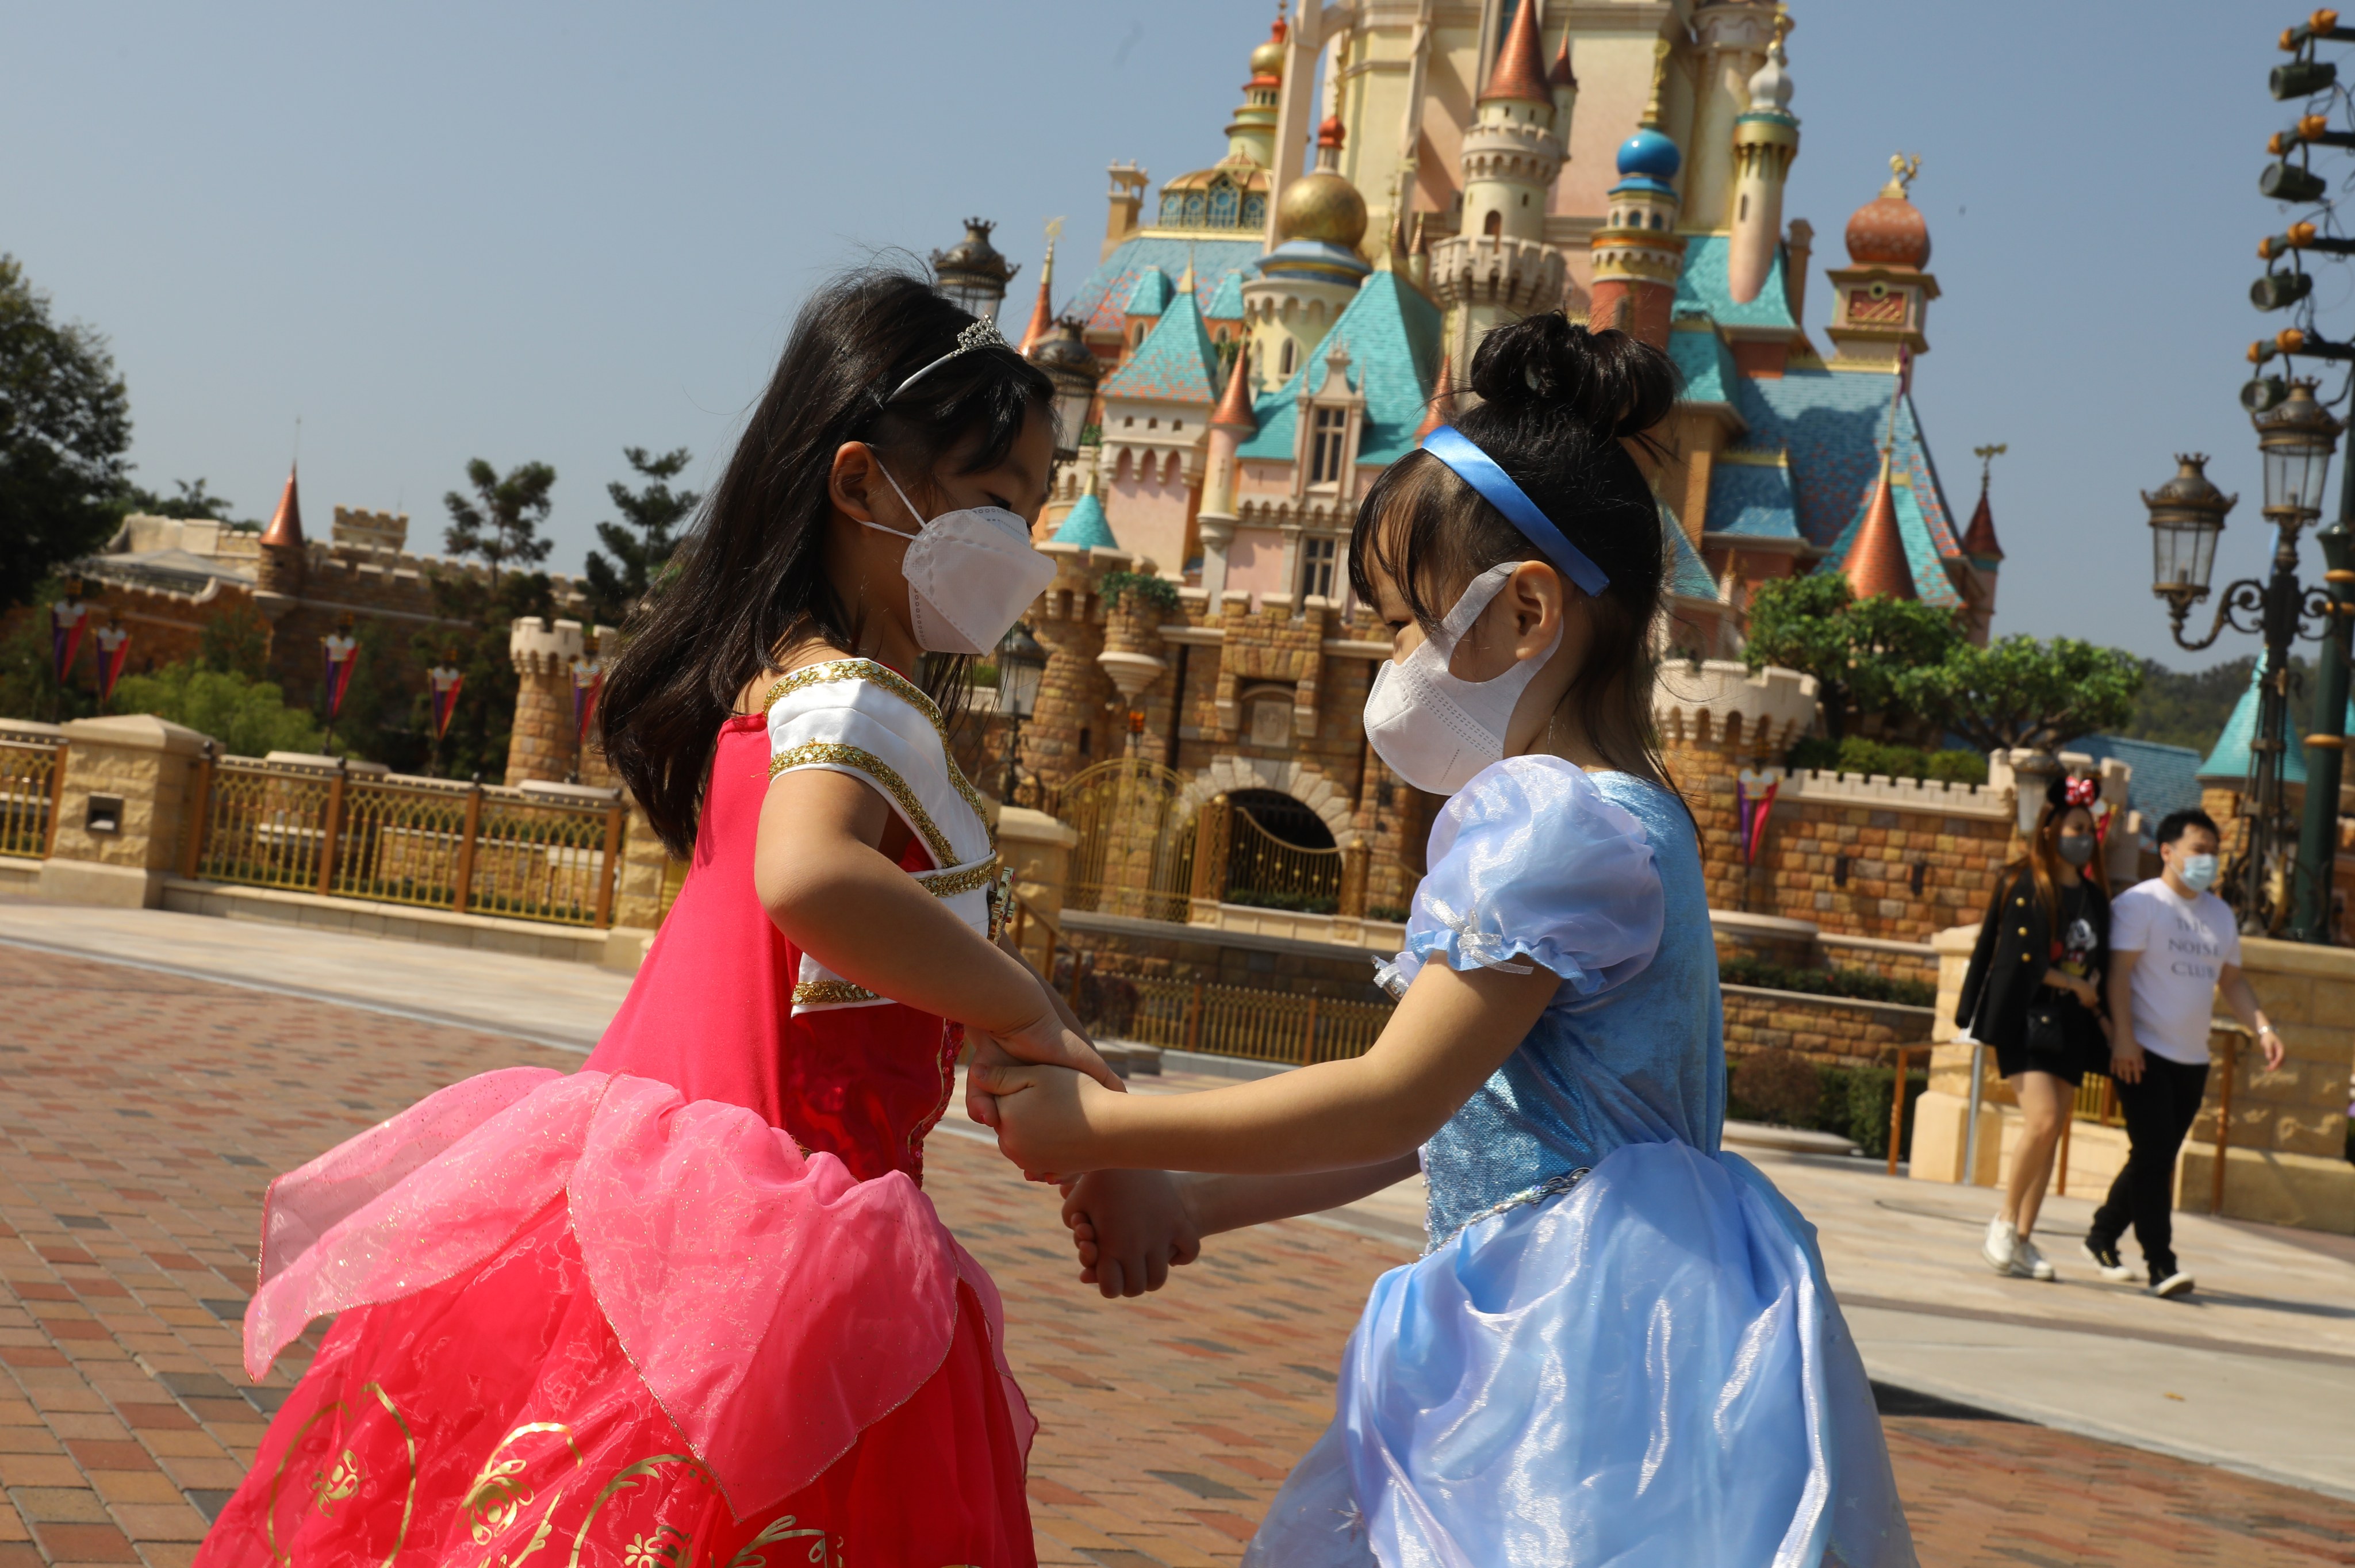 Hong Kong Disneyland reported a record net loss of HK$2.7 billion for the last financial year. Photo: SCMP/Dickson Lee